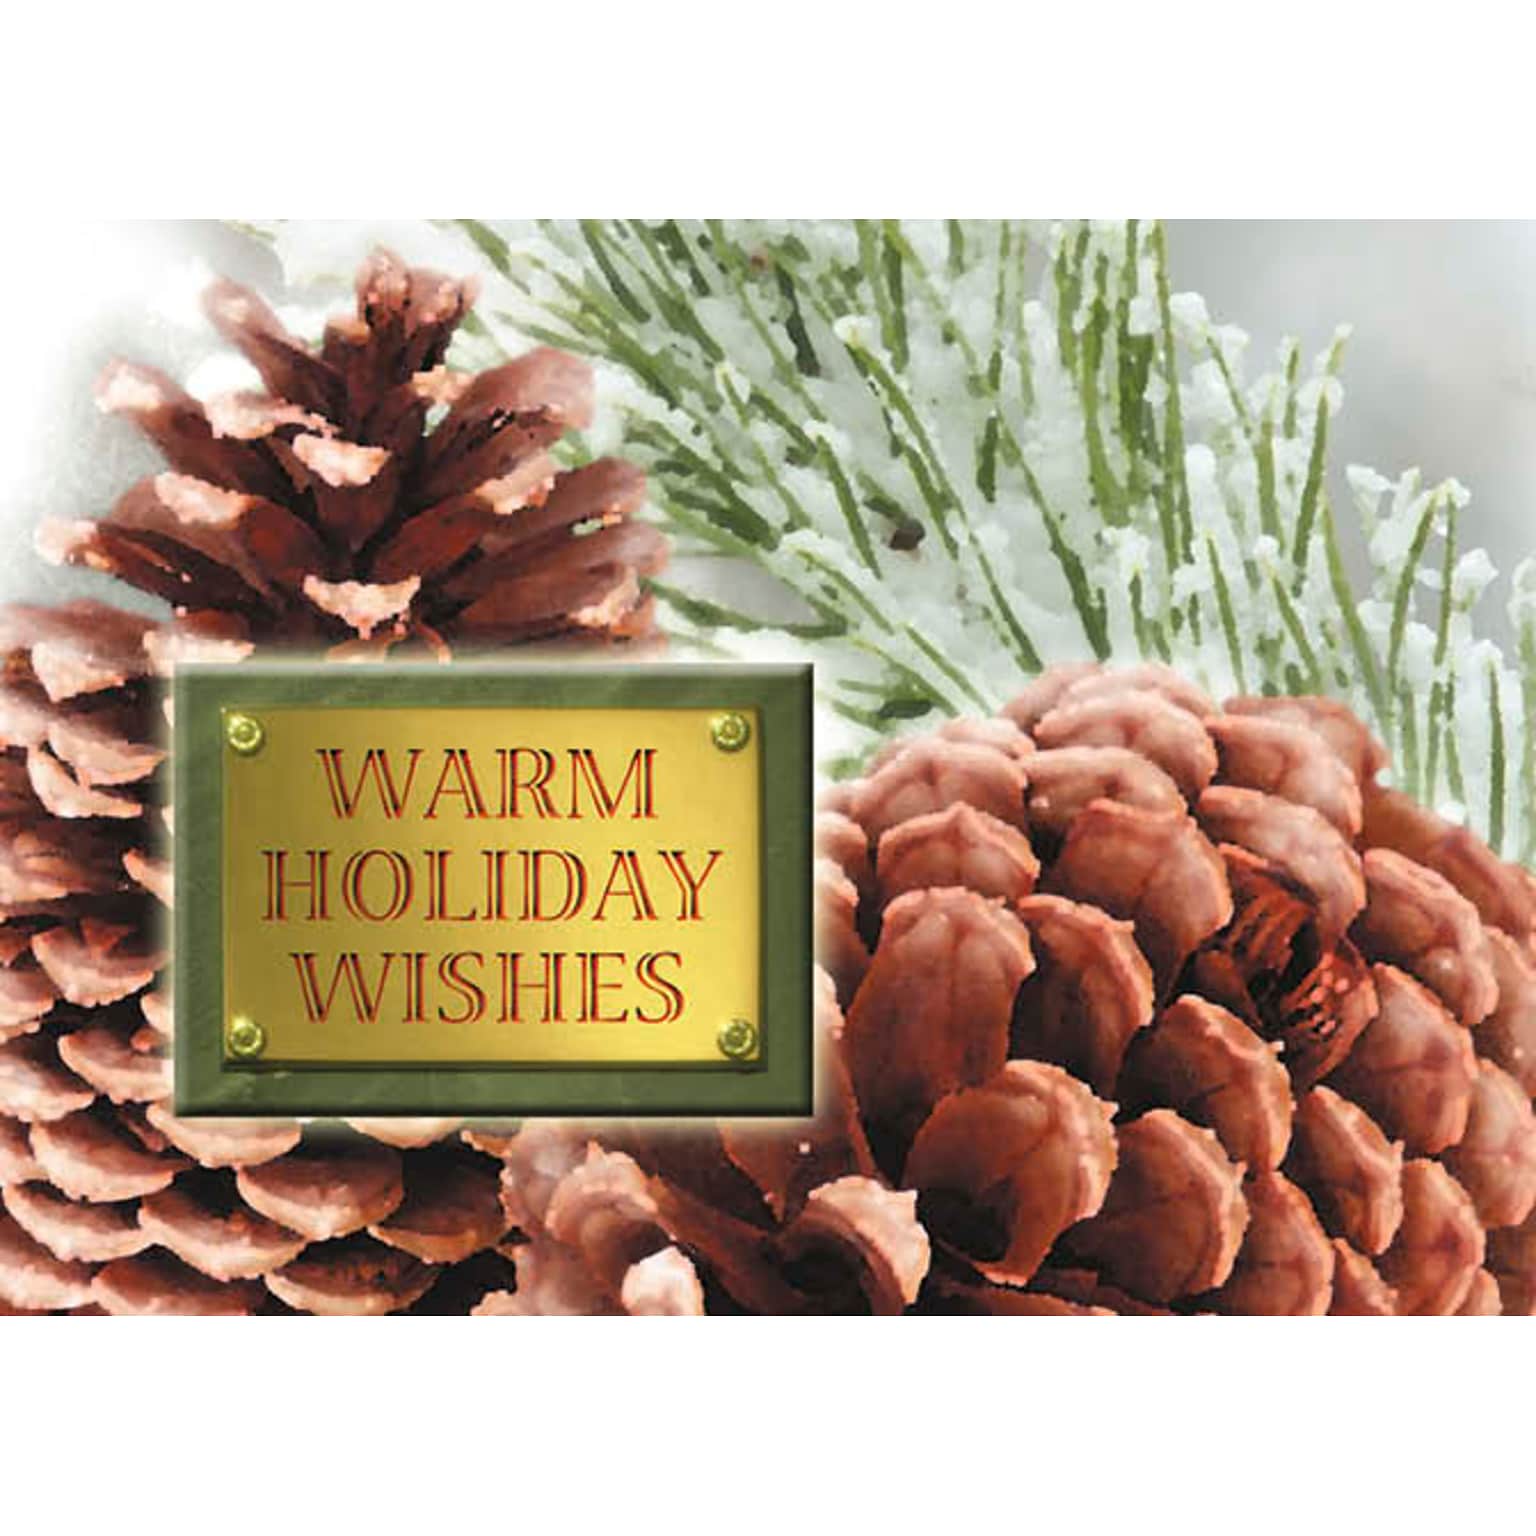 Warm Holiday Wishes Pinecones Holiday Greeting Cards, With A7 Envelopes, 7 x 5, 25 Cards per Set